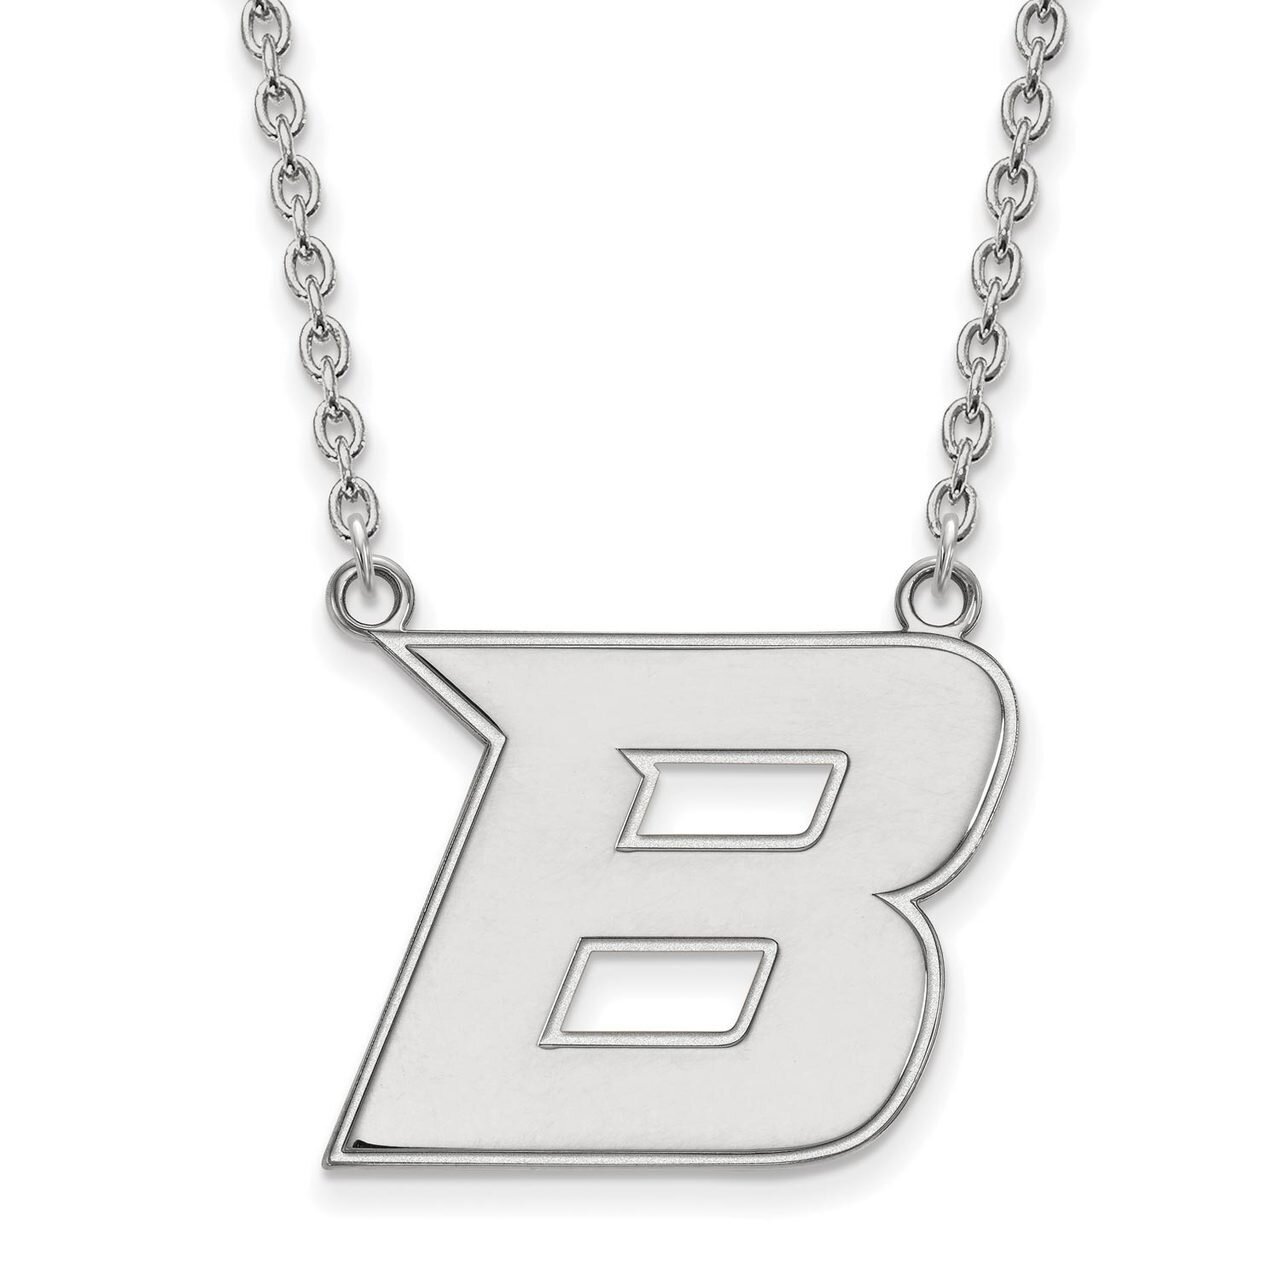 Boise State University Large Pendant with Chain Necklace 10k White Gold 1W008BOS-18